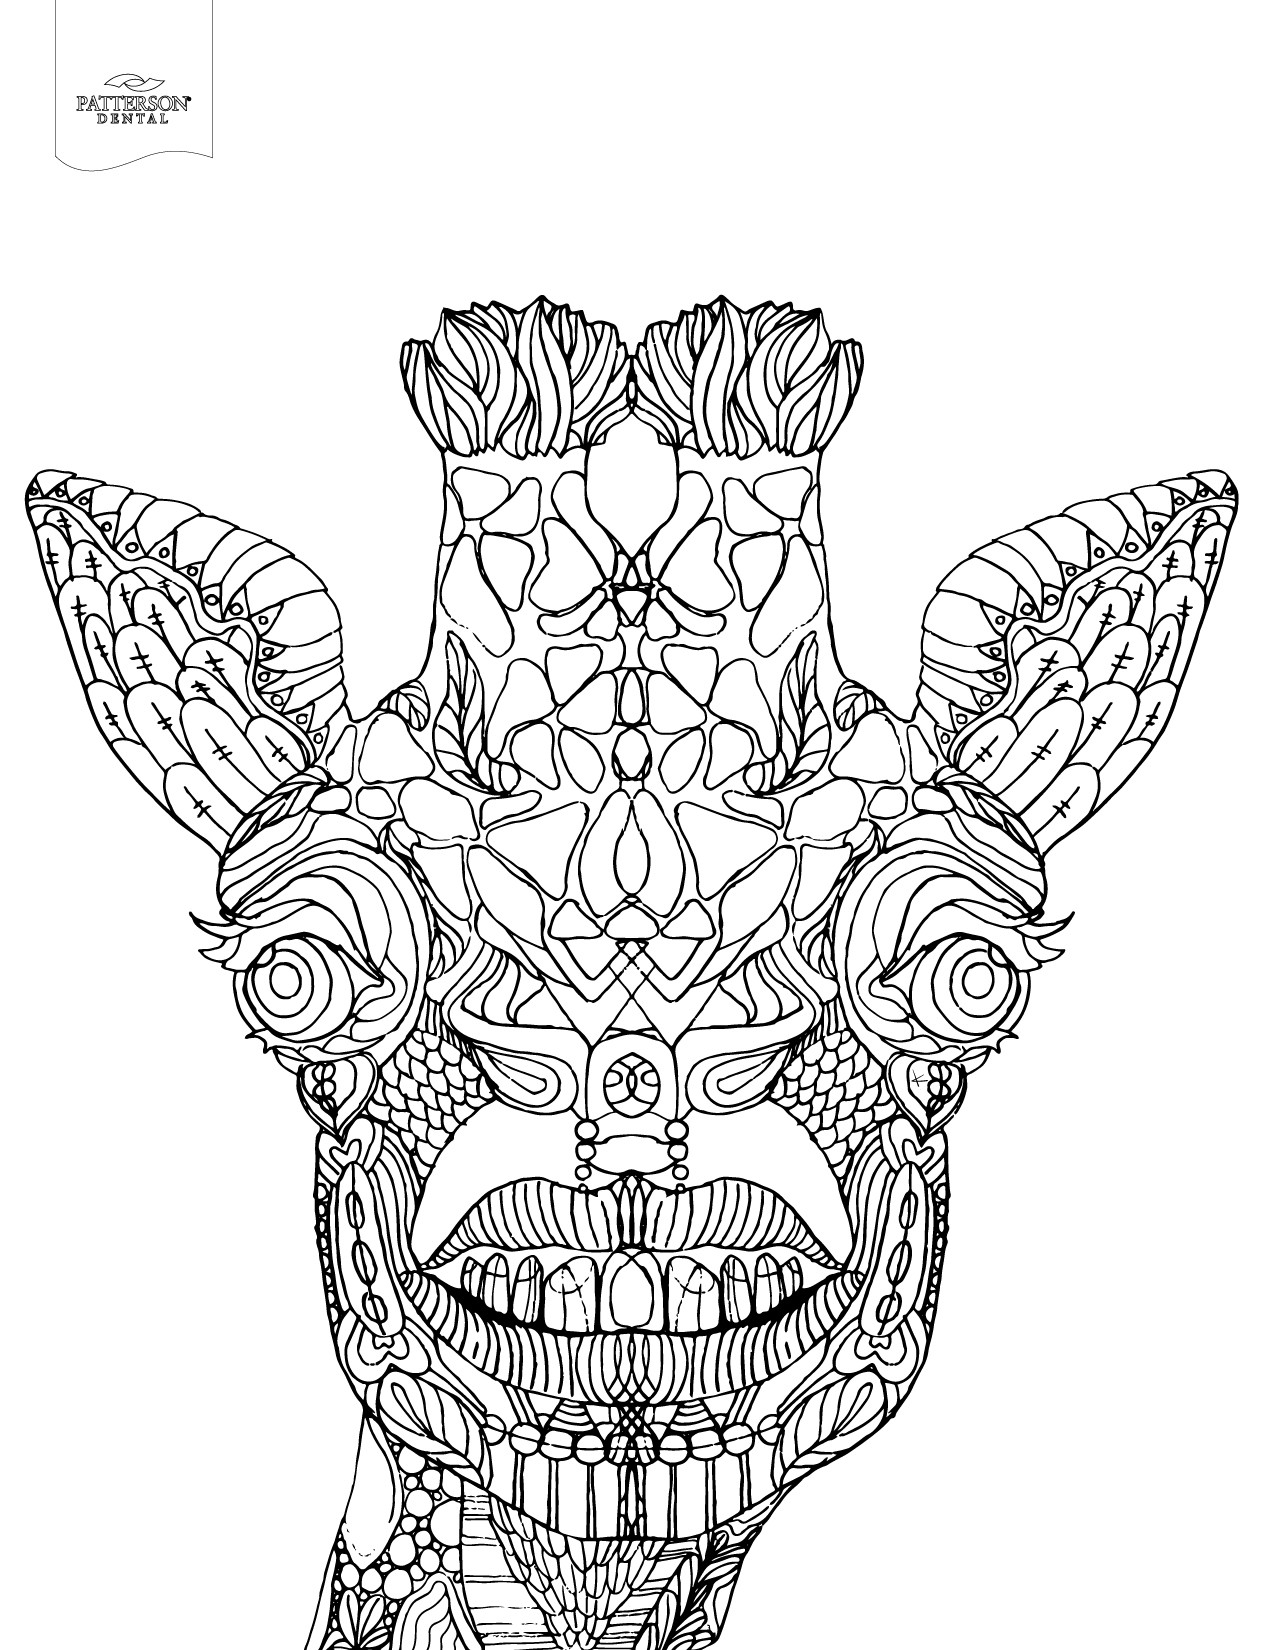 Coloring Sheets For Adults Printable
 10 Toothy Adult Coloring Pages [Printable] f the Cusp